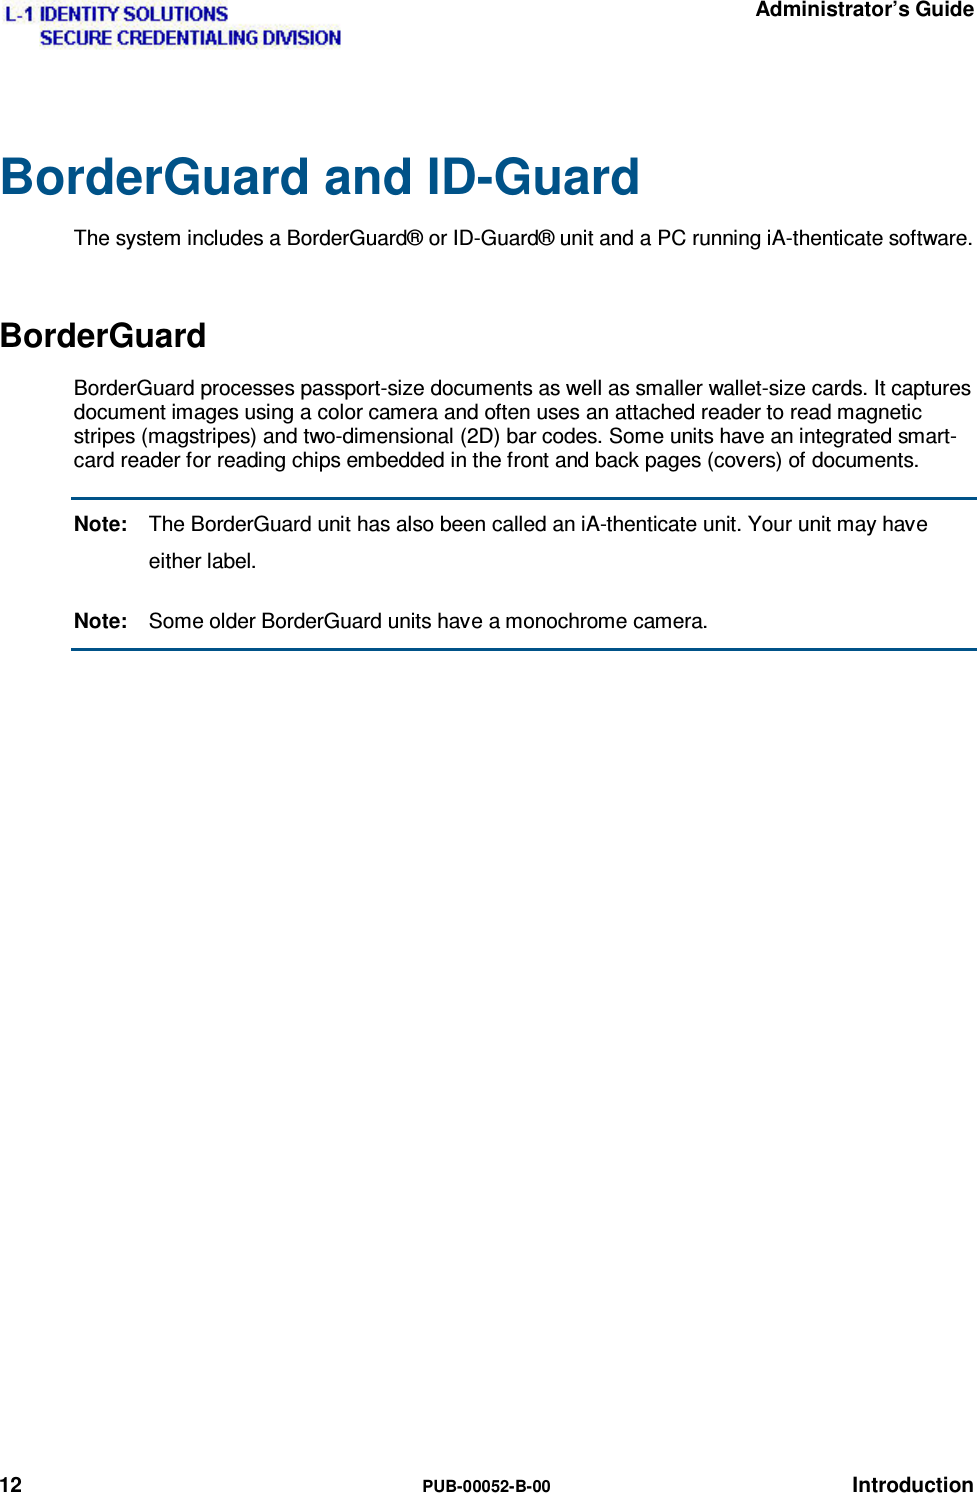   Administrator’s Guide 12  PUB-00052-B-00 Introduction BorderGuard and ID-Guard The system includes a BorderGuard® or ID-Guard® unit and a PC running iA-thenticate software. BorderGuard BorderGuard processes passport-size documents as well as smaller wallet-size cards. It captures document images using a color camera and often uses an attached reader to read magnetic stripes (magstripes) and two-dimensional (2D) bar codes. Some units have an integrated smart-card reader for reading chips embedded in the front and back pages (covers) of documents. Note:  The BorderGuard unit has also been called an iA-thenticate unit. Your unit may have either label. Note:  Some older BorderGuard units have a monochrome camera.   